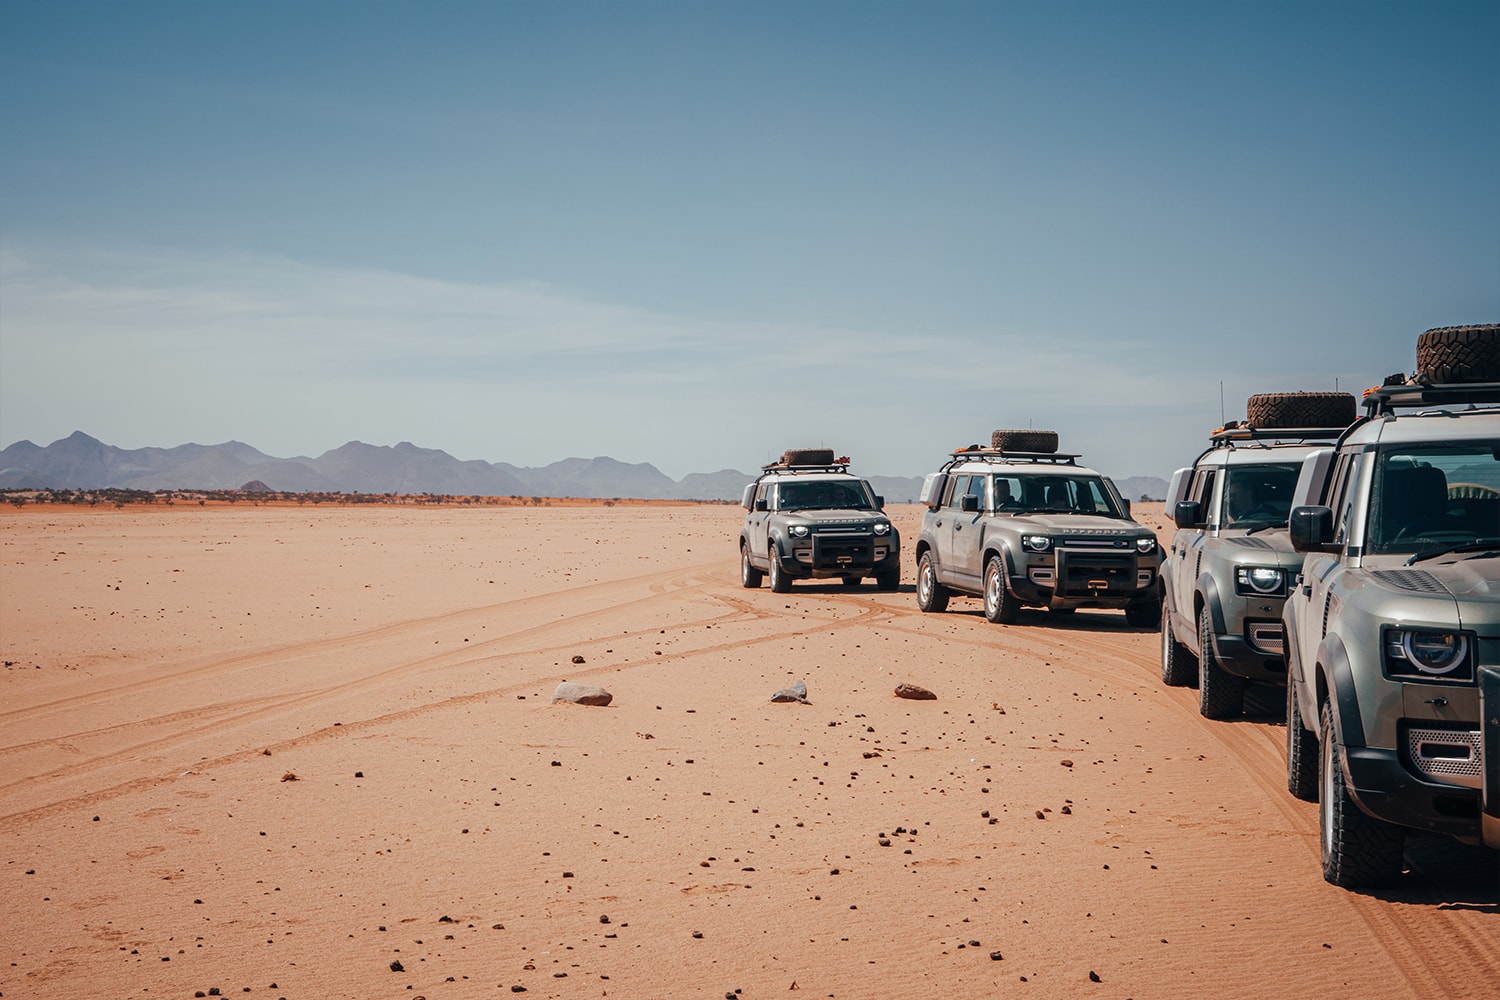 New Land Rover Defender in Namibia James Bond 2020 007 Africa South Africa Desert off-roading awd adventure 